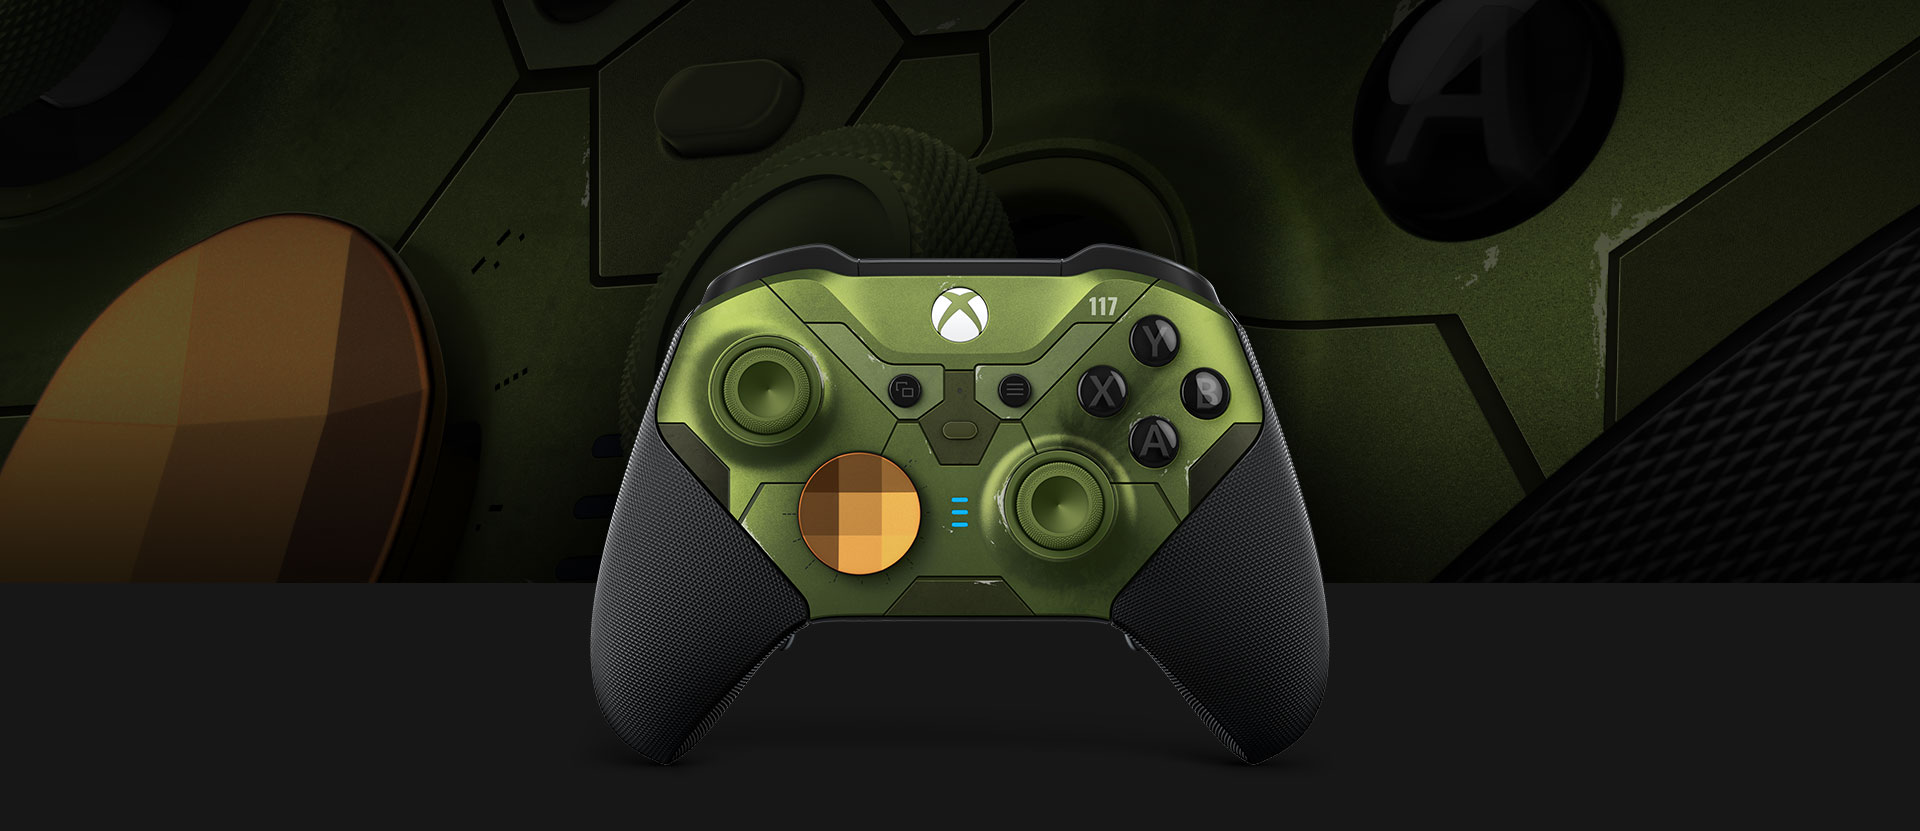 Front view of the Xbox Elite Wireless controller series 2 with a close up of the controller in the background